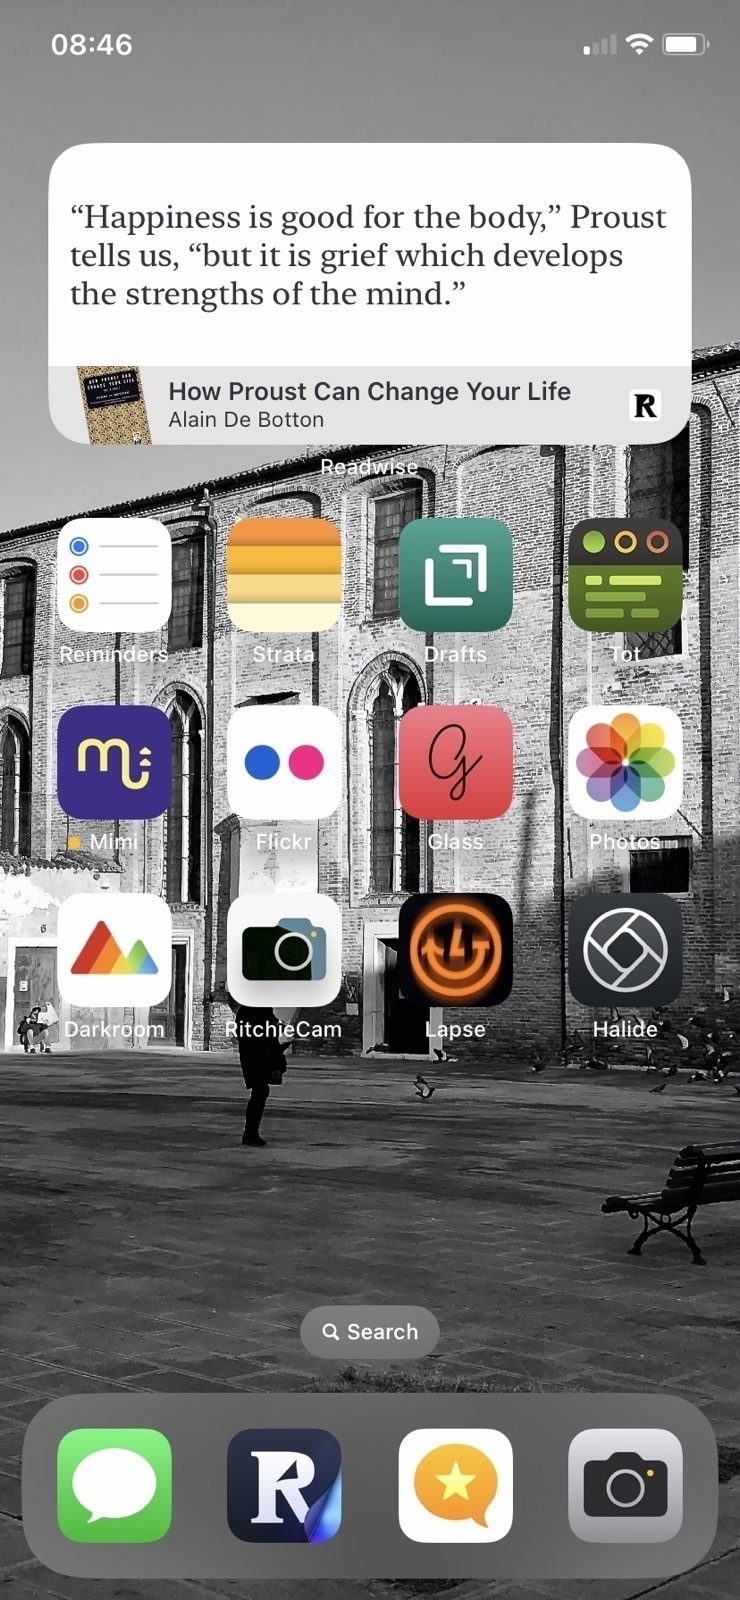 Screenshot of an iPhone screen displaying a variety of apps, a widget with a literary quote from Marcel Proust, and a black and white background image of a public square with a person walking and birds on the ground.